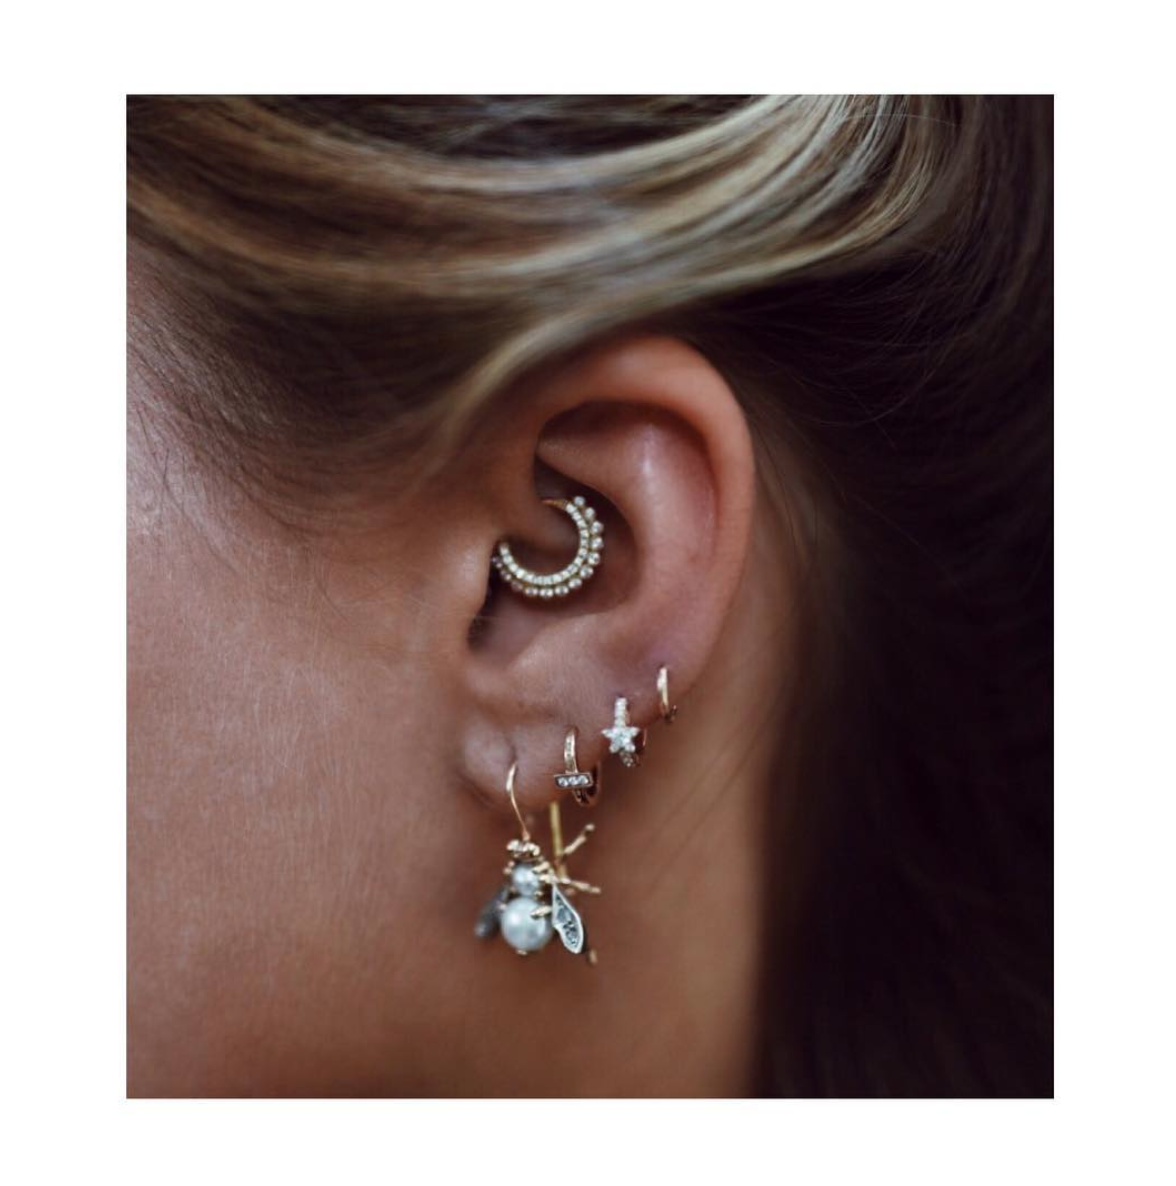 Trend Report: Statement Earrings | Love Daily Dose